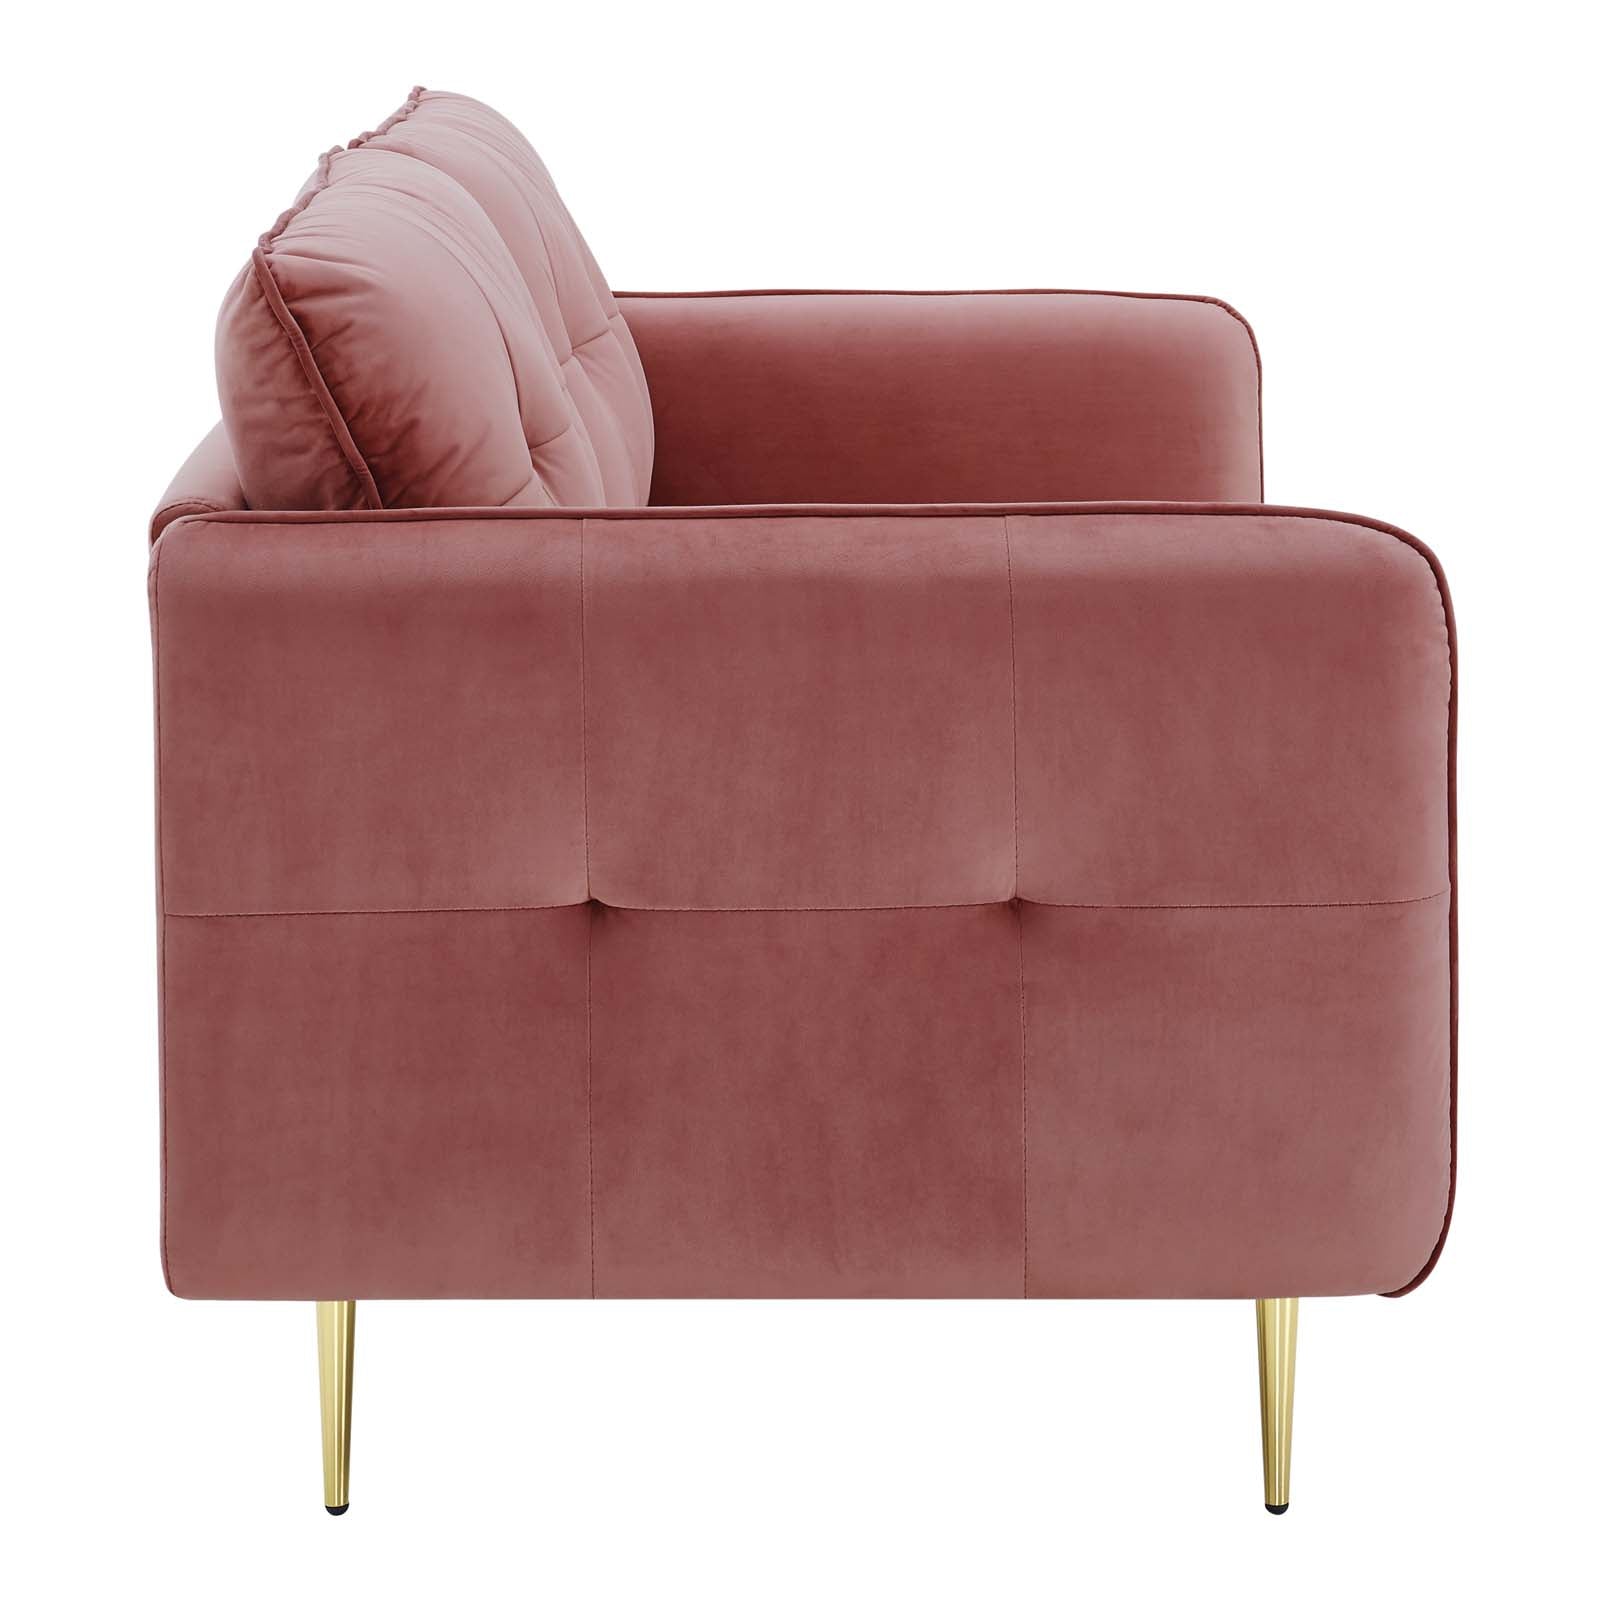 Modway Sofas & Couches - Cameron Tufted Performance Velvet Sofa Dusty Rose